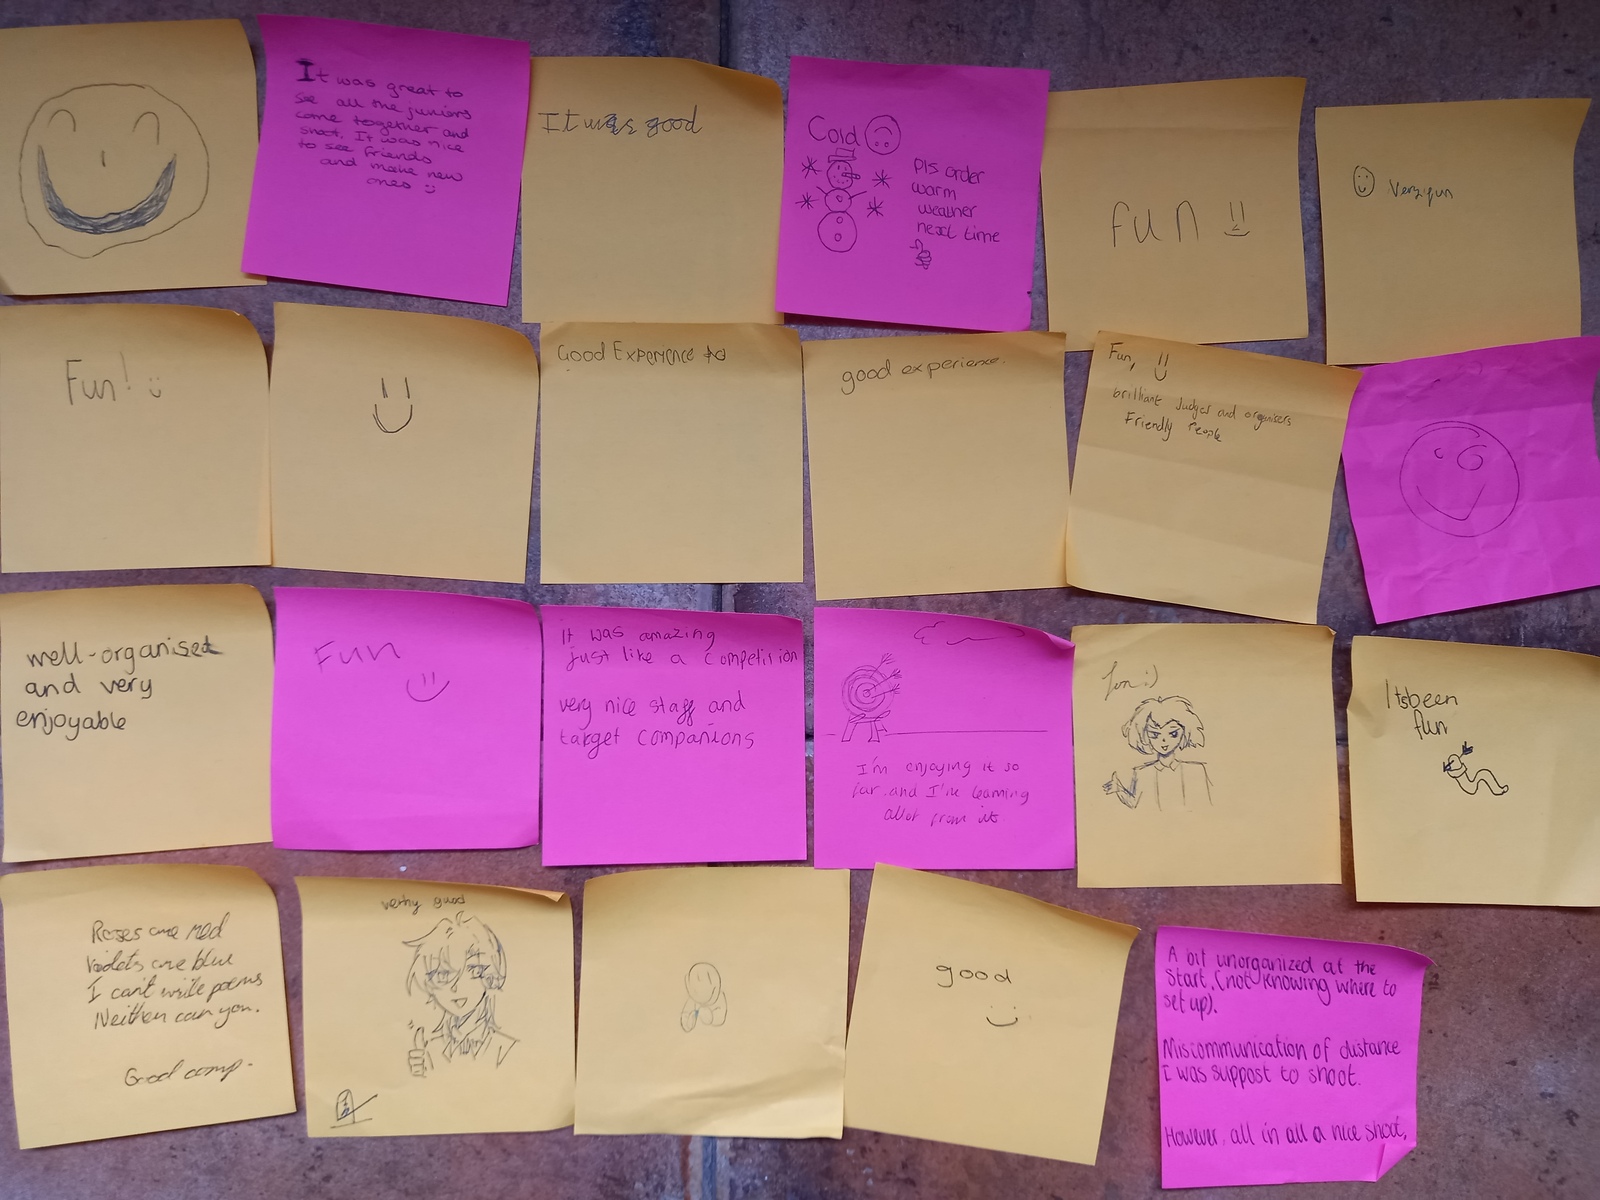 Post-it notes showing feedback